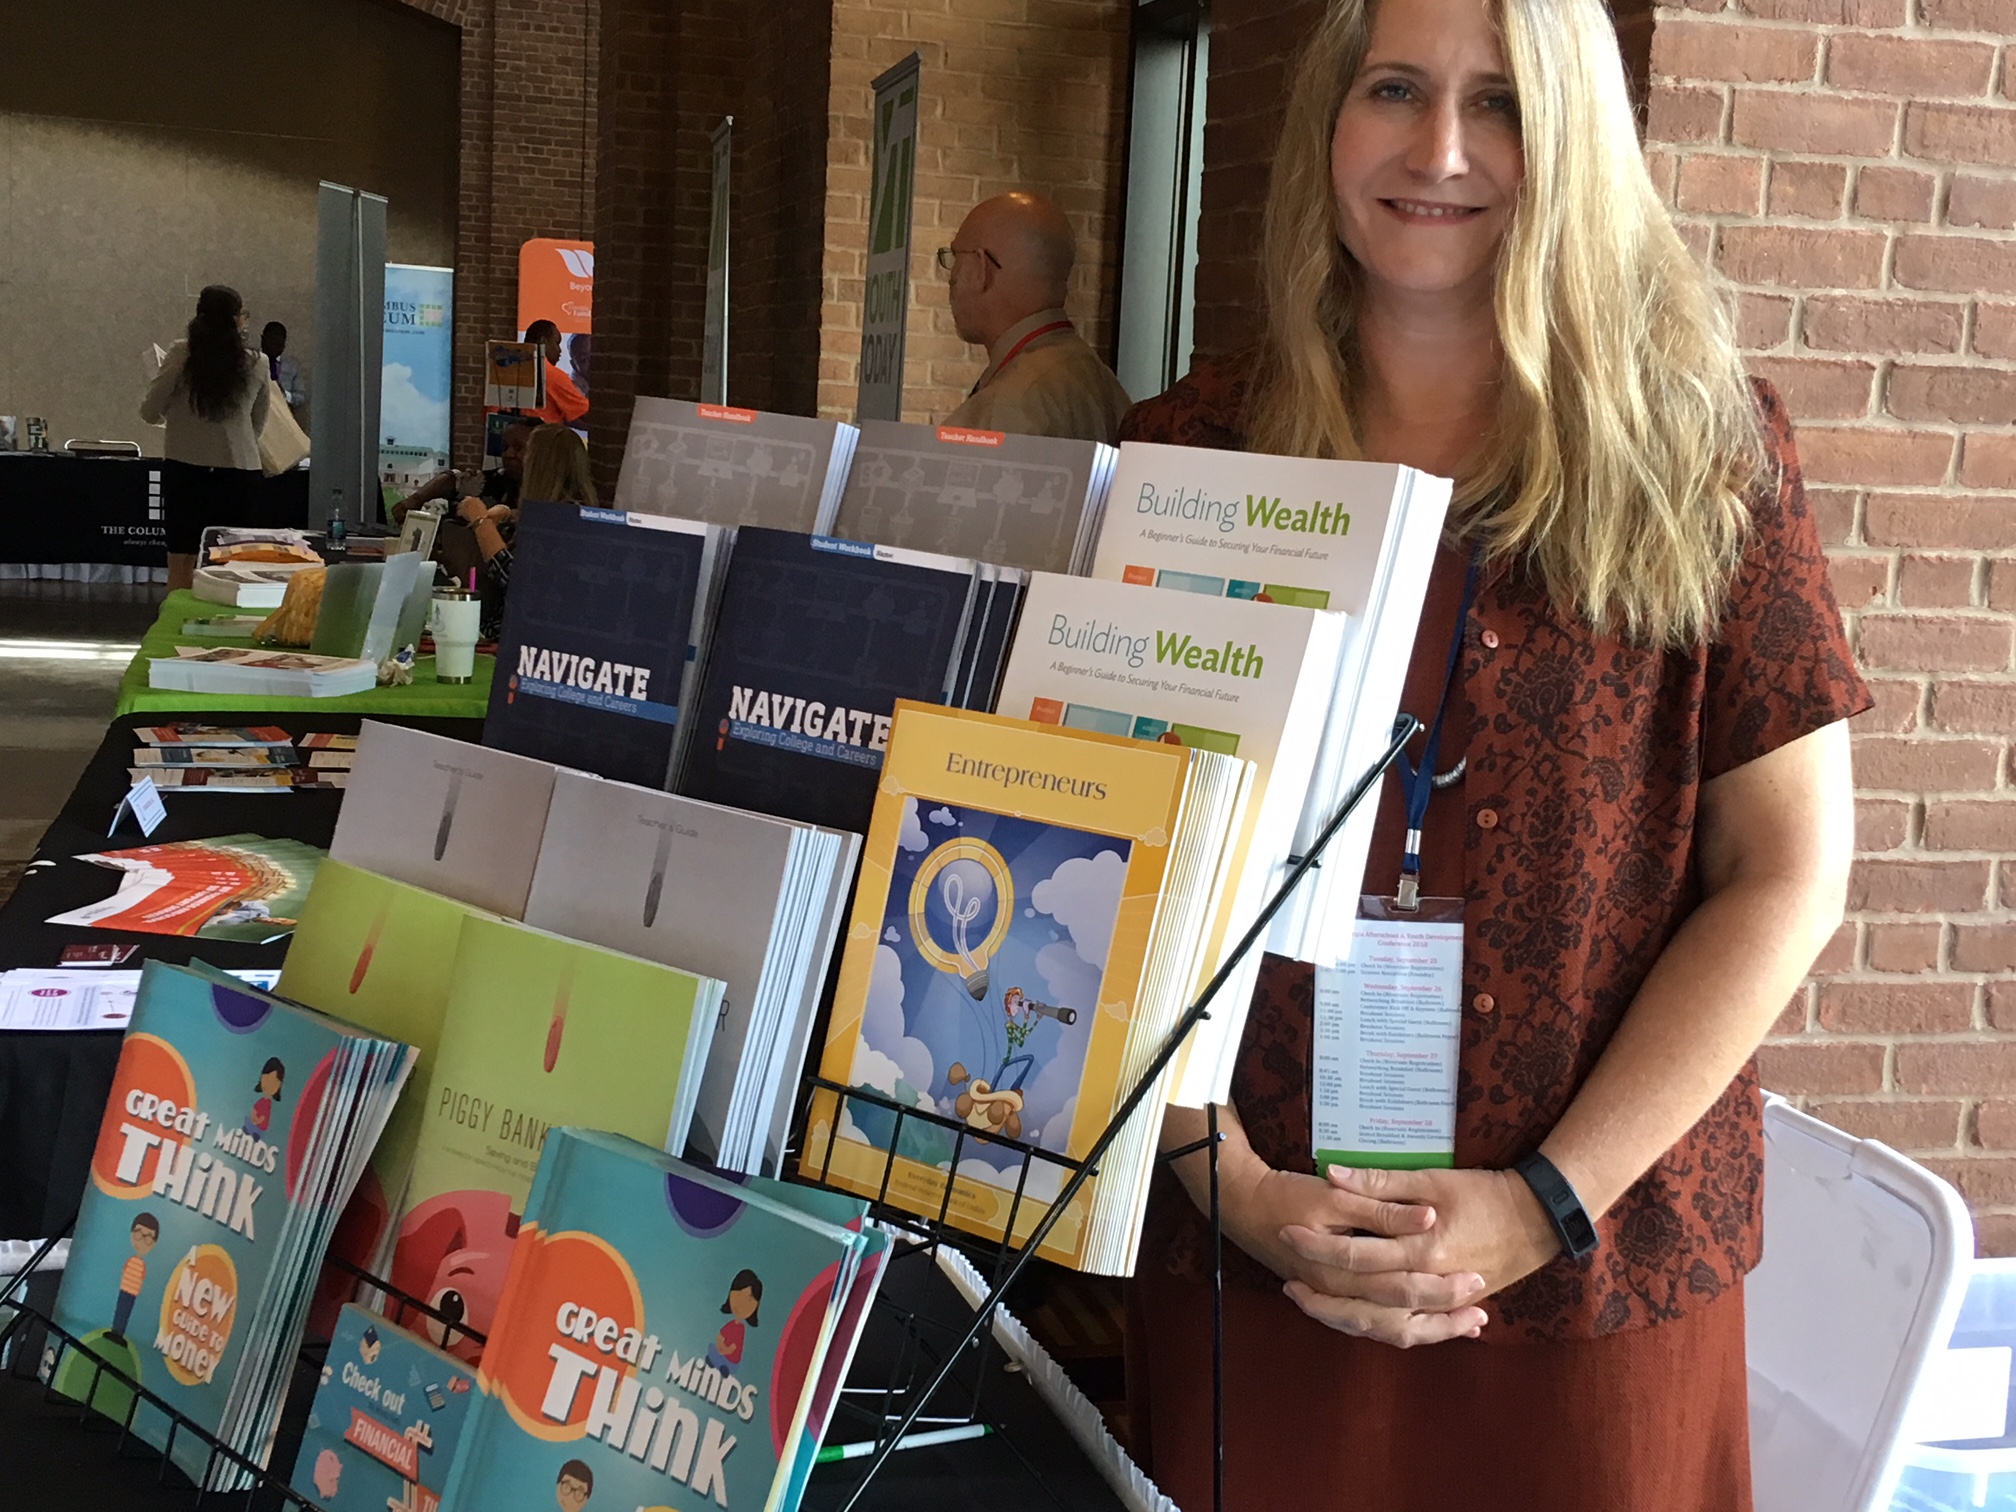 Federal Reserve Bank: Woman with long blonde hair, orange skirt and blouse stands next to table stand full of books, pamphlet about finance.